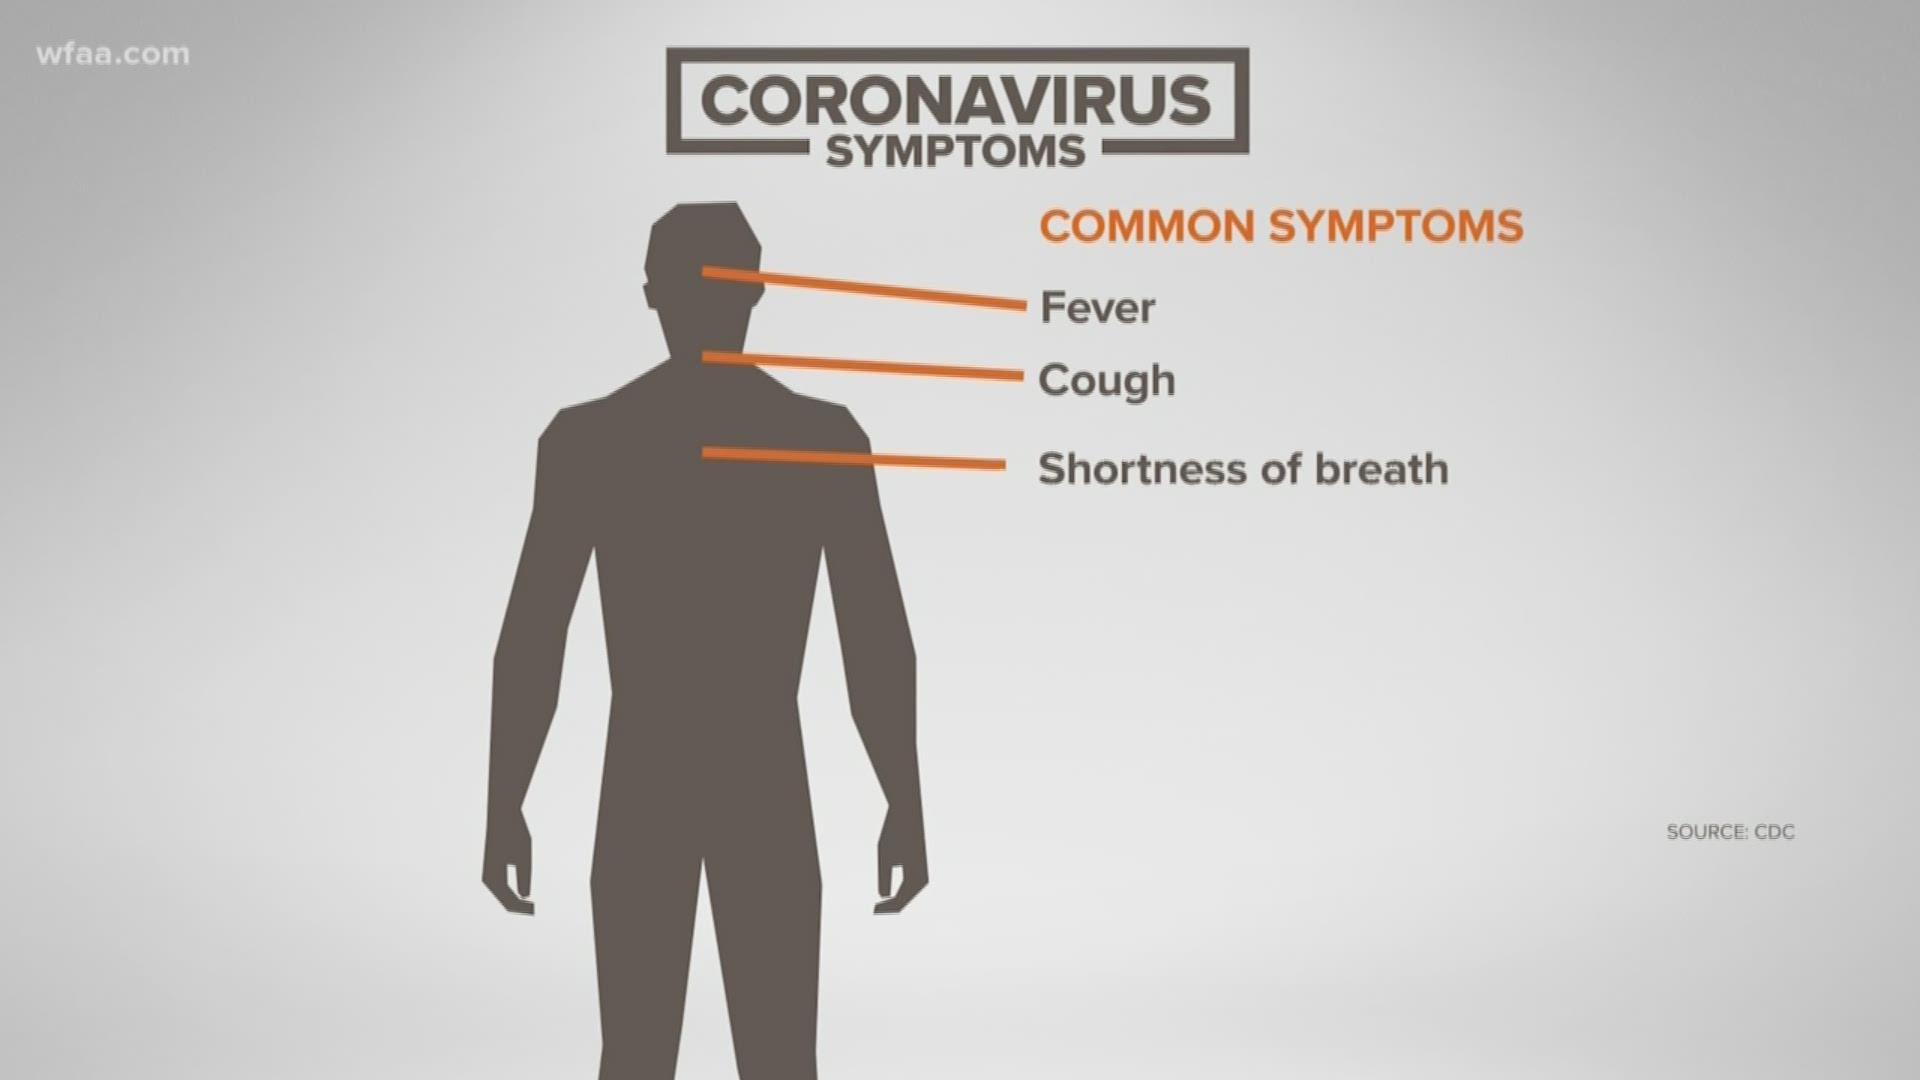 With around 80,000 confirmed cases of the novel coronavirus worldwide, searches for information about the outbreak have jumped.